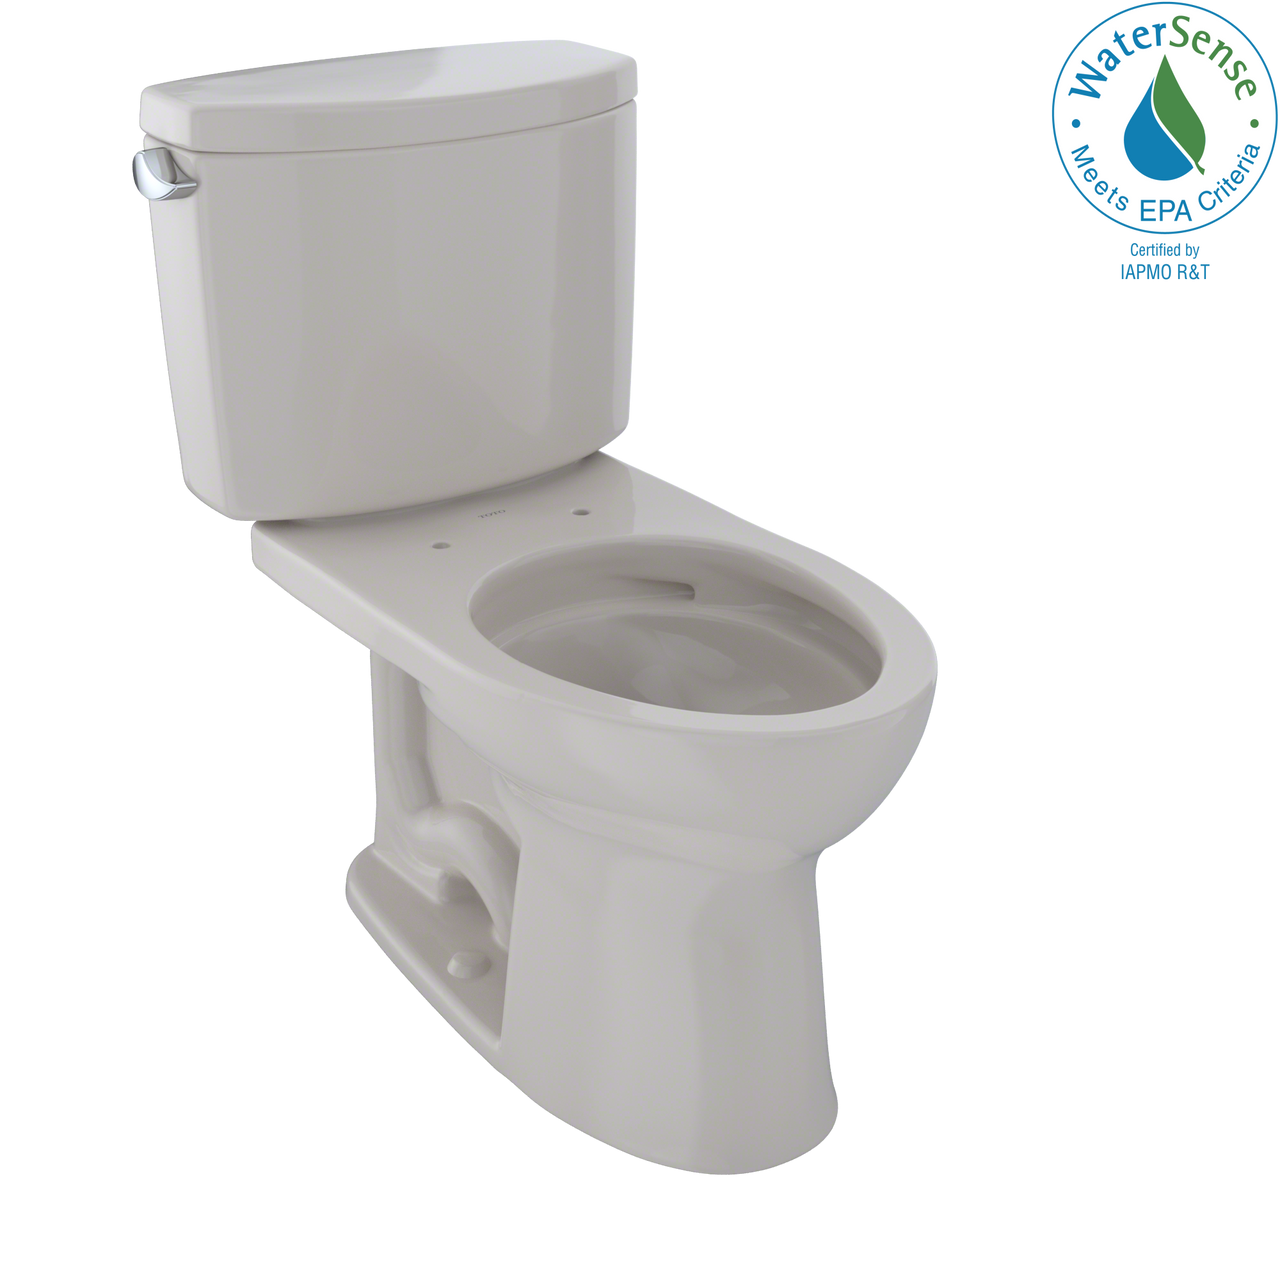 TOTO Drake II Two-Piece Elongated 1.28 GPF Universal Height Toilet with CeFiONtect,  - CST454CEFG#12 - BNGBath